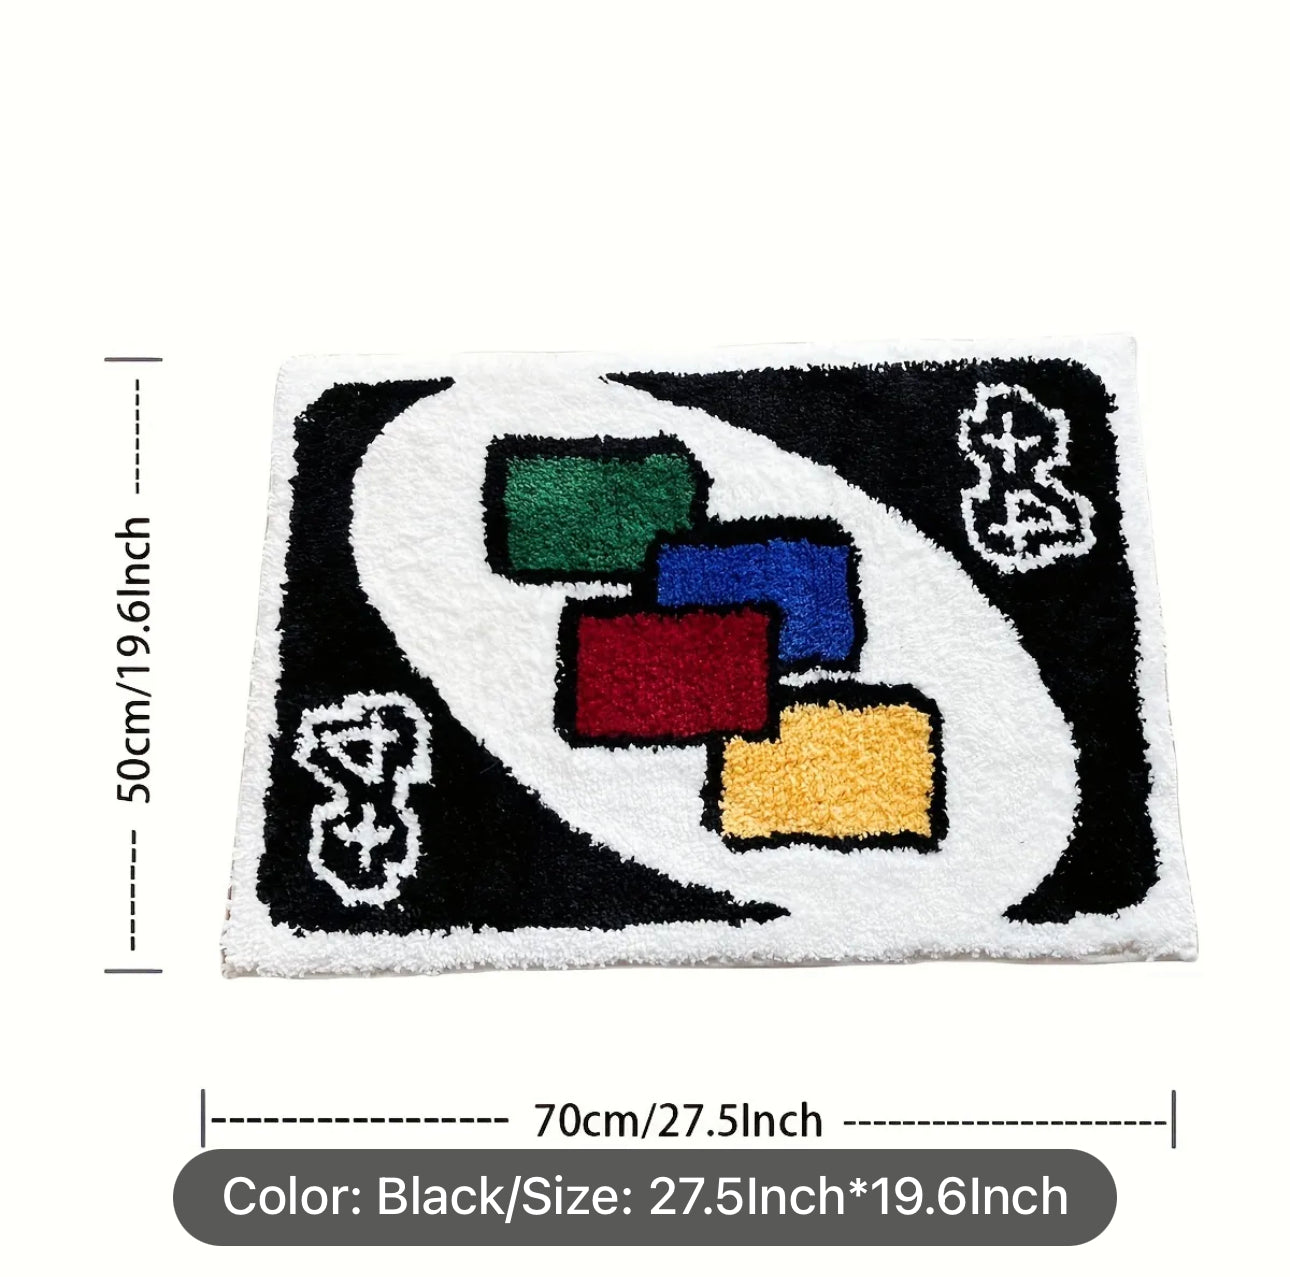 Brighten Up Your Girl's Room with this Creative Multicolor Hand Tufted Rug - Perfect Birthday Gift!